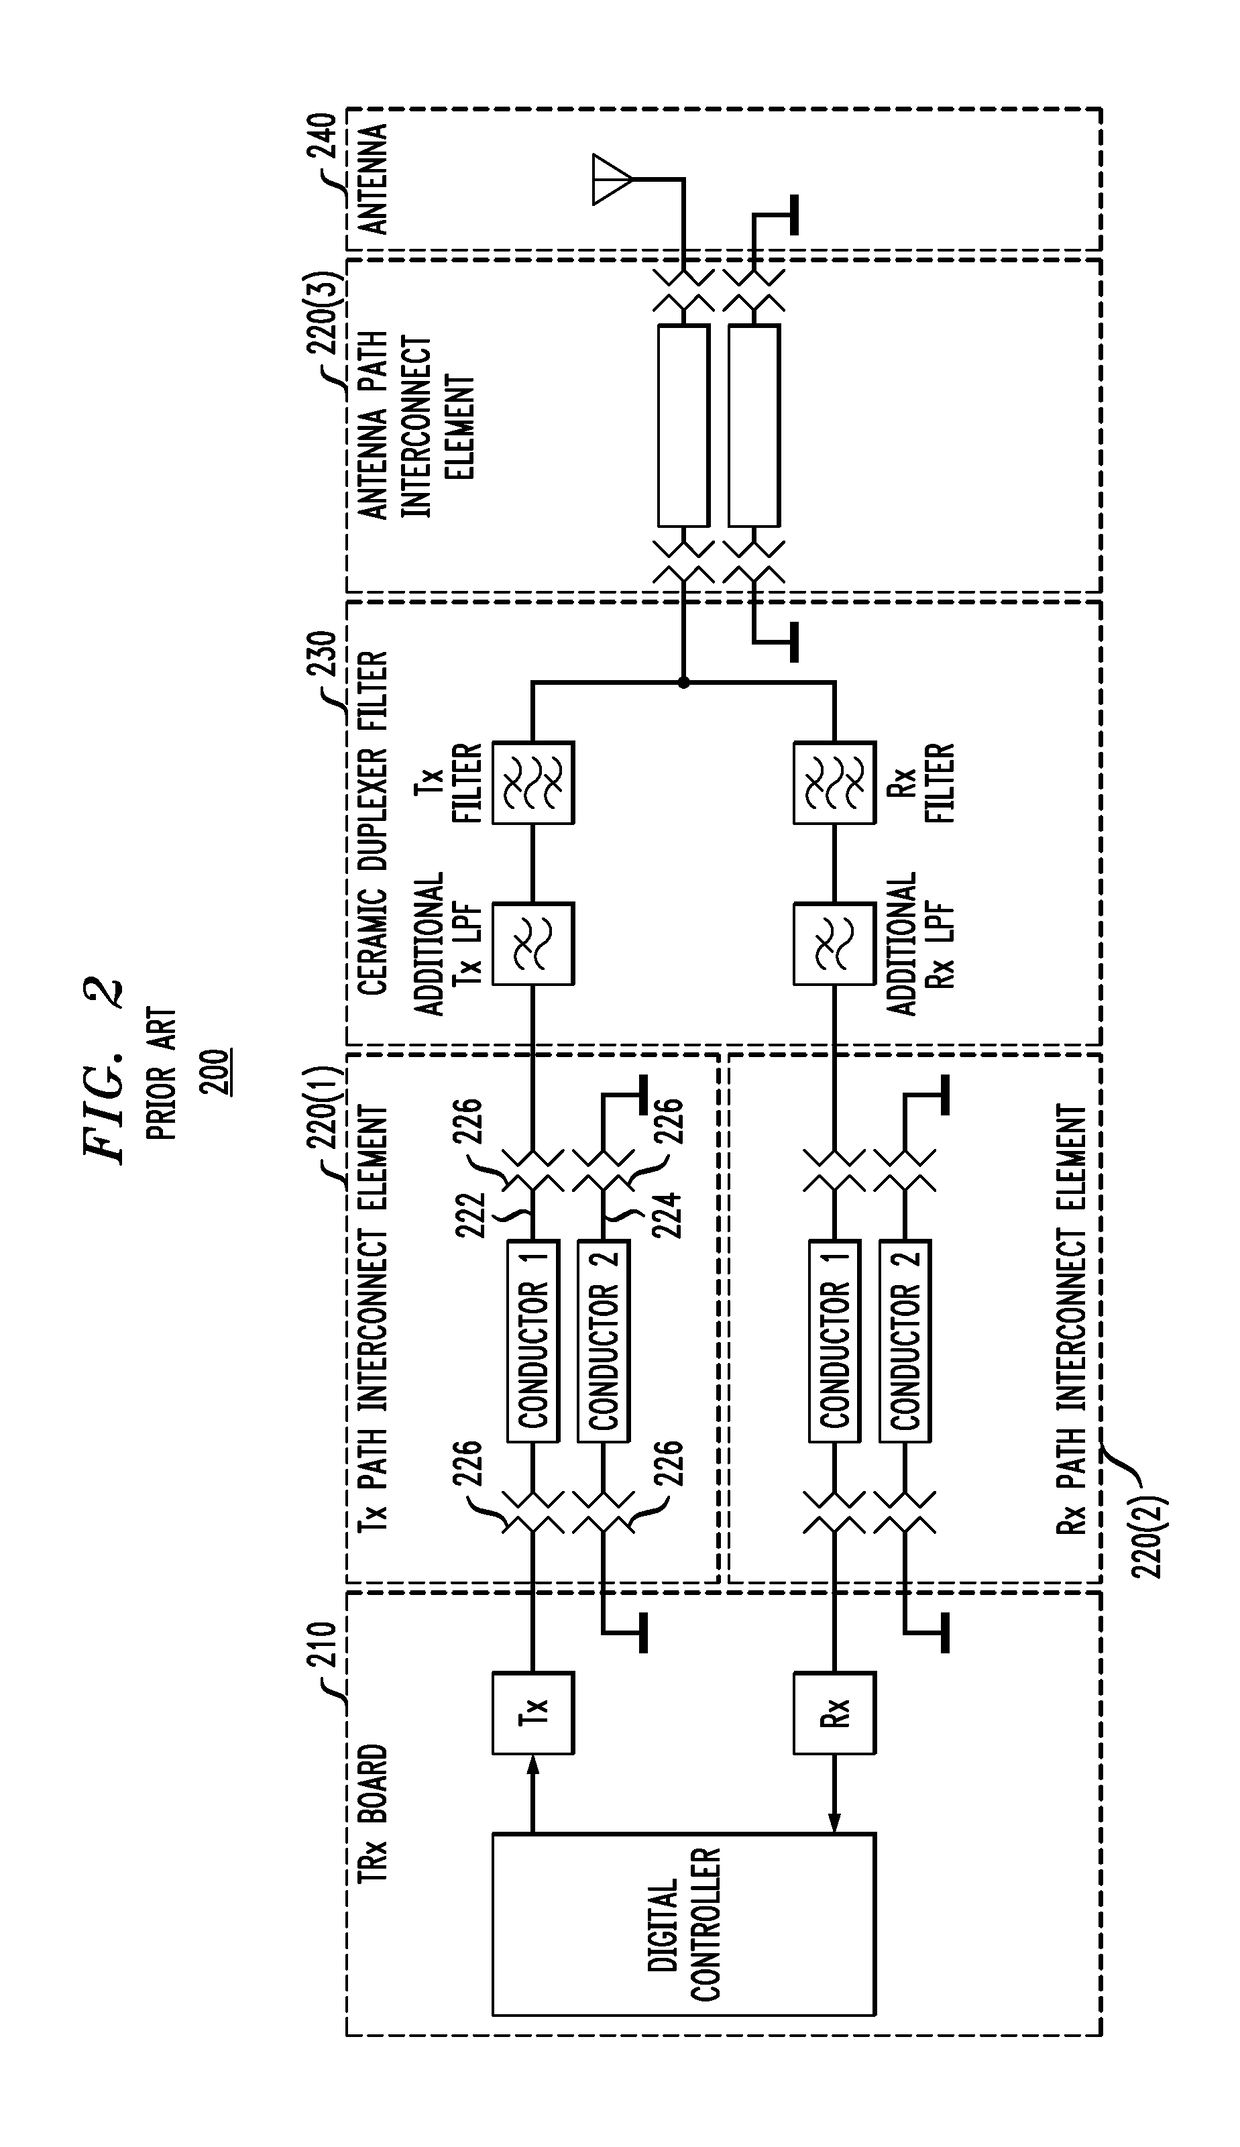 Interconnect element circuitry for RF electronics